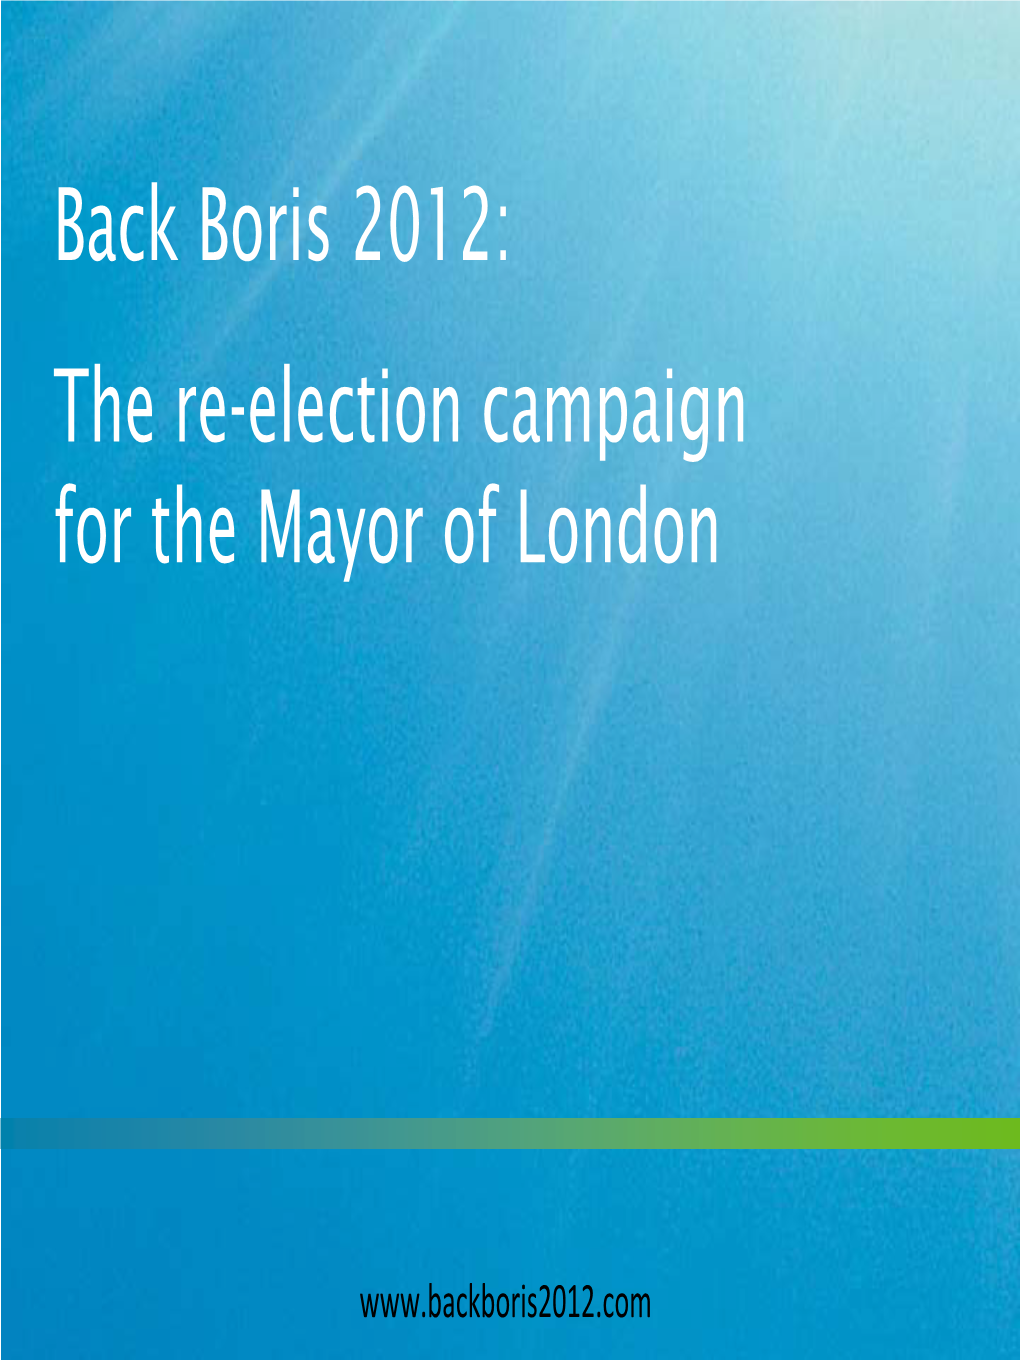 Back Boris 2012: the Re-Election Campaign for the Mayor of London